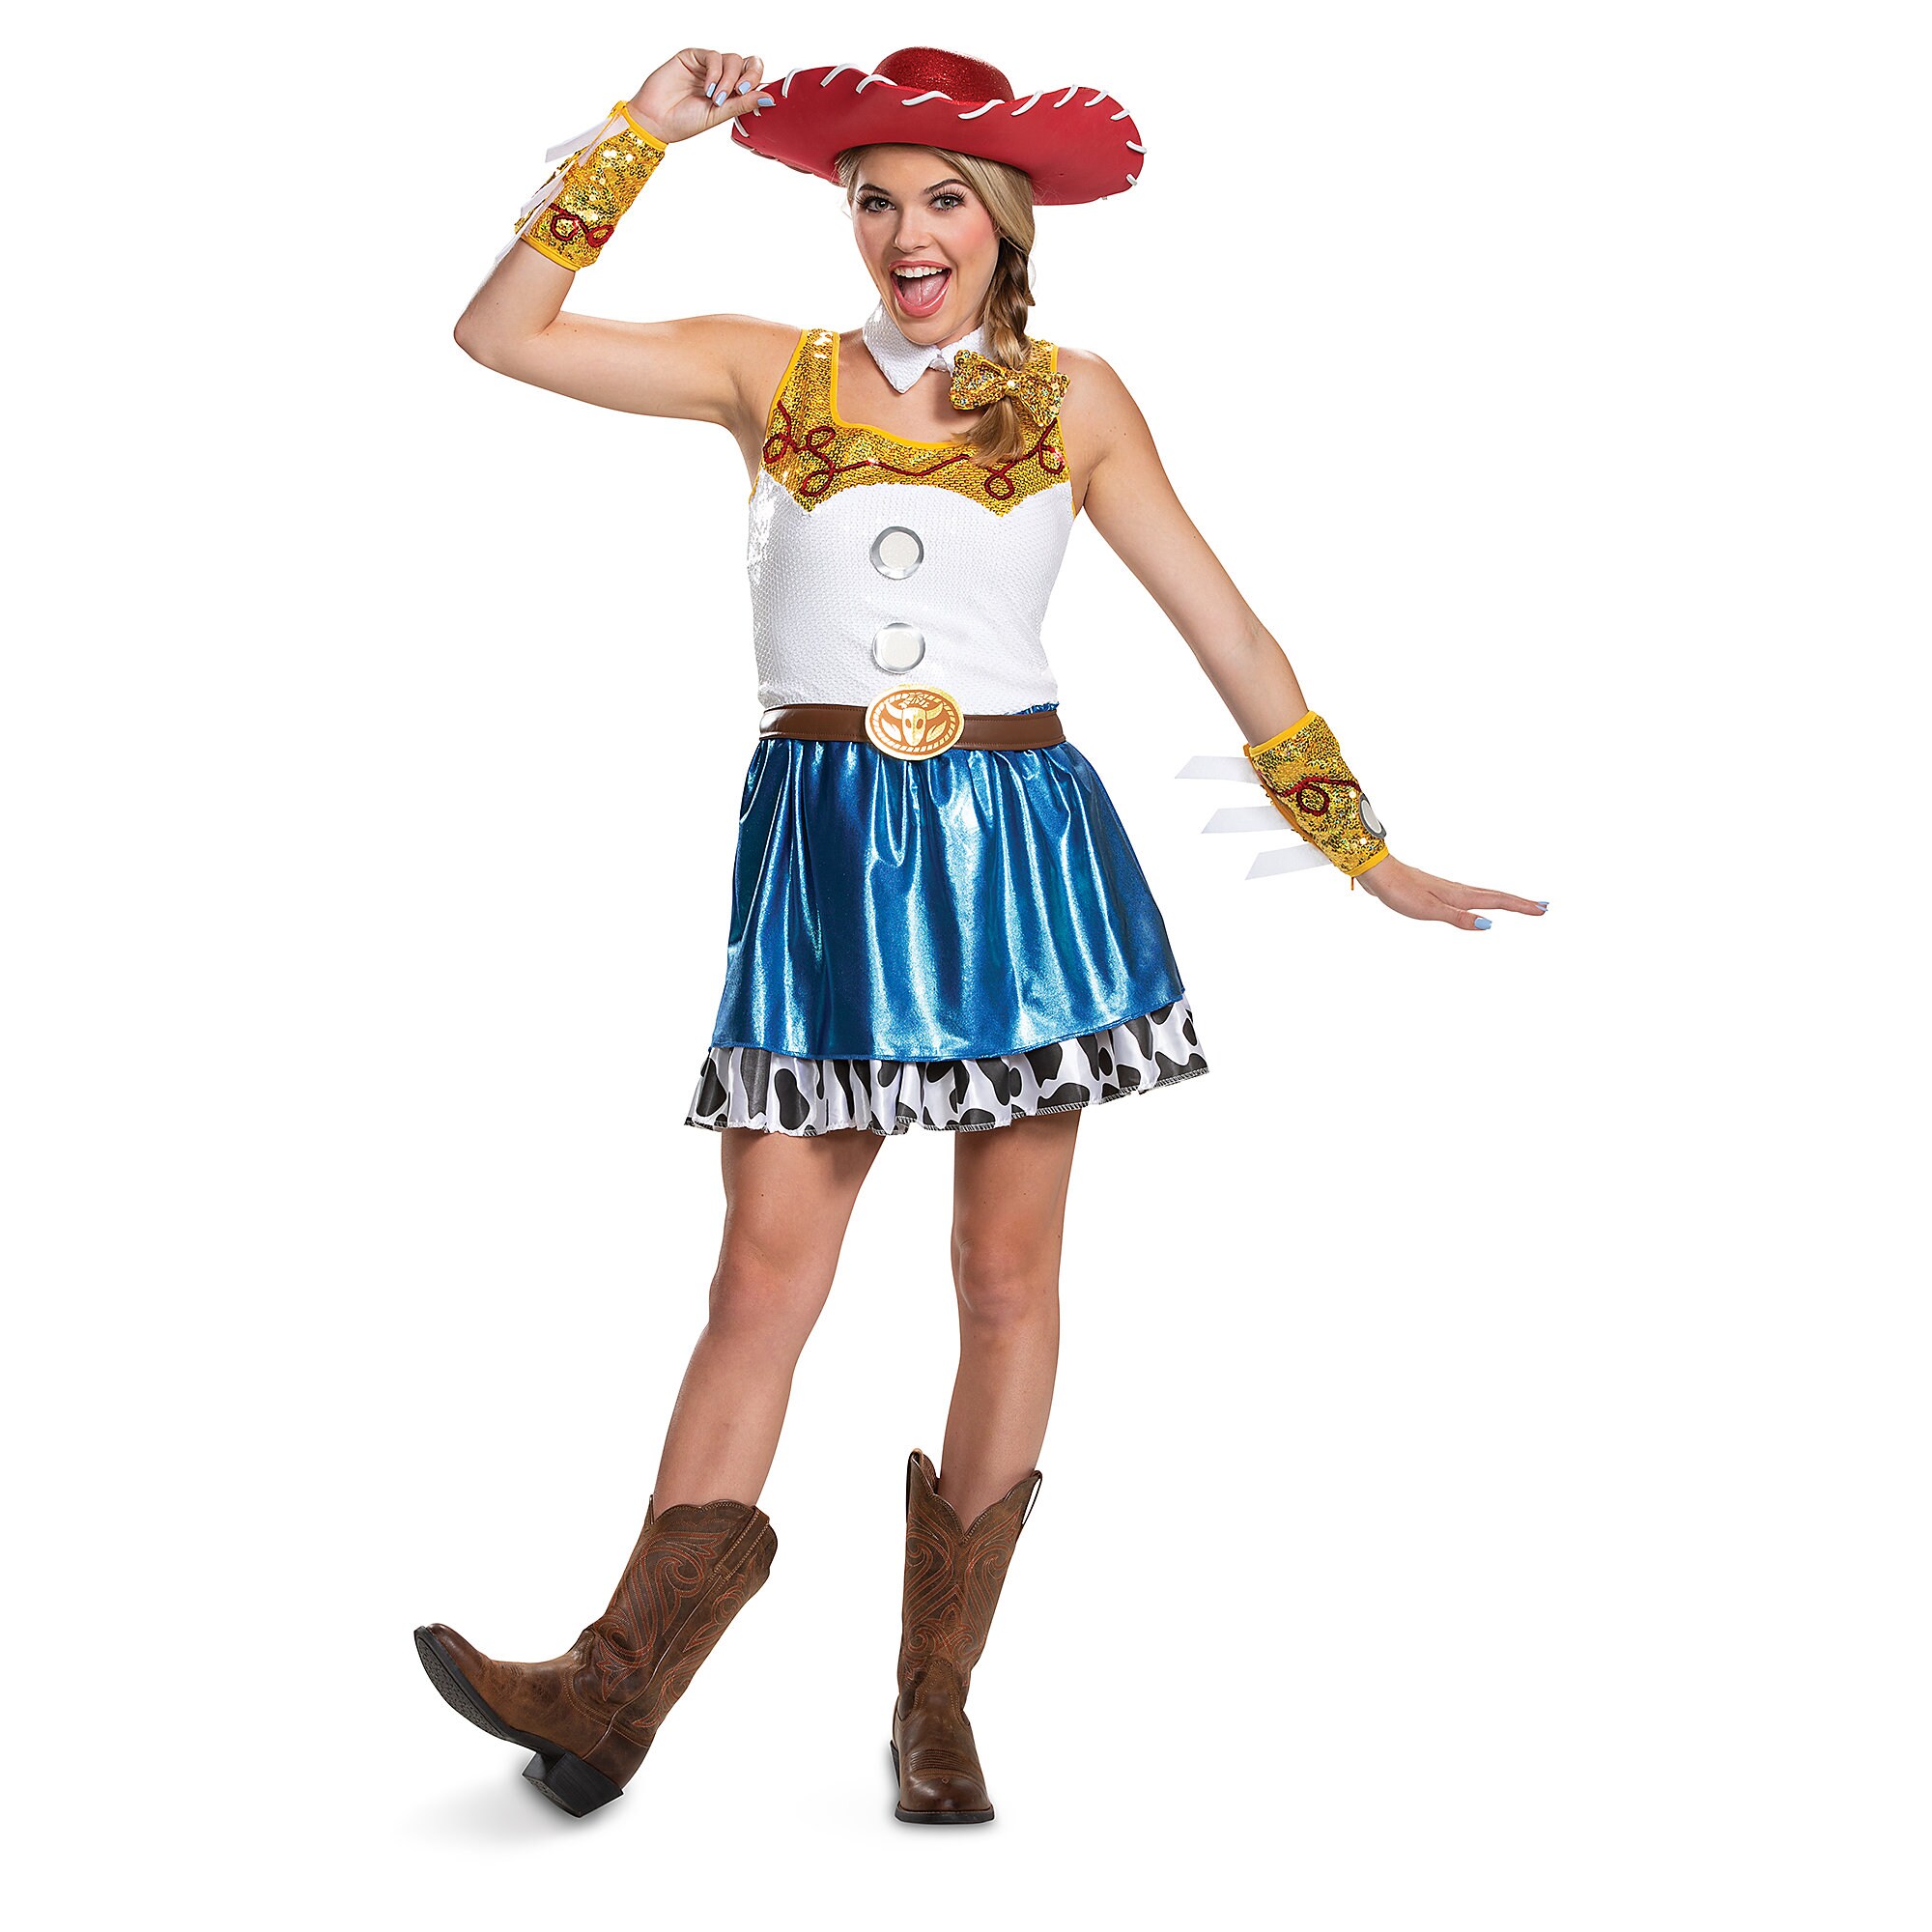 Jessie Dress Costume for Adults by Disguise - Toy Story